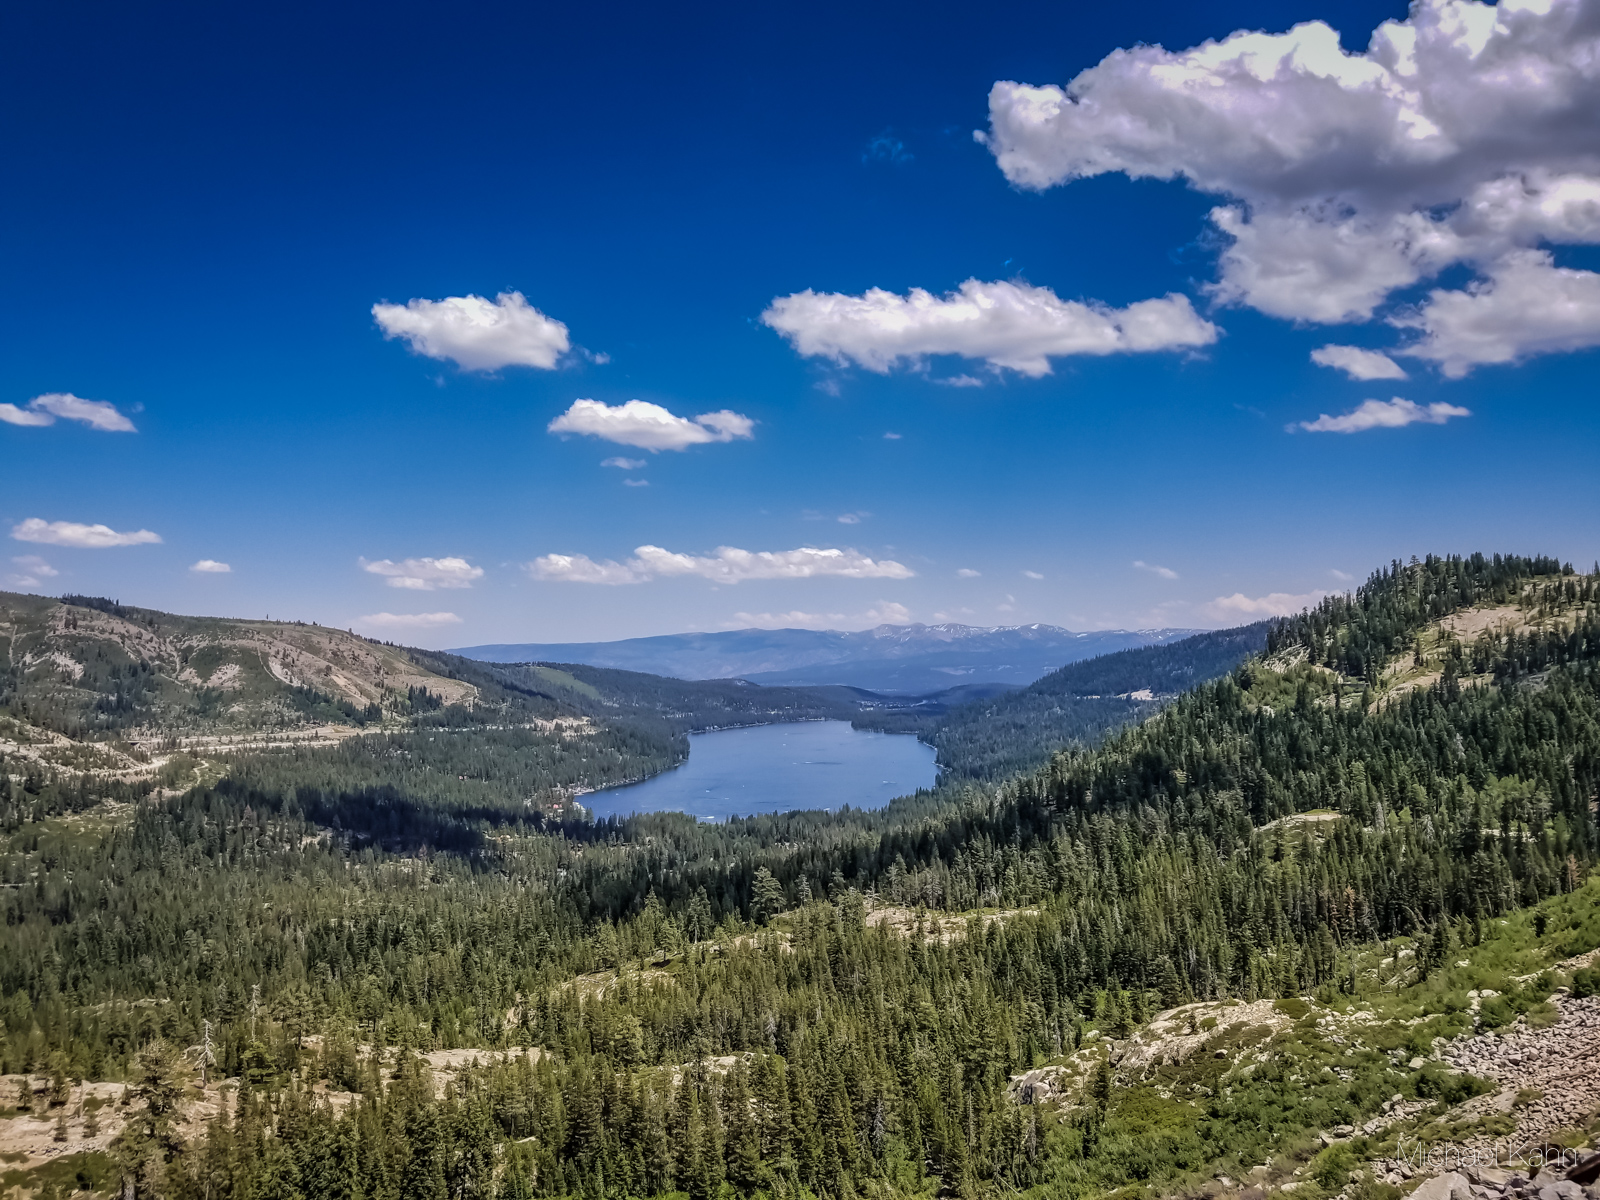 Donner pass summit tunnel hike, view of donner lake